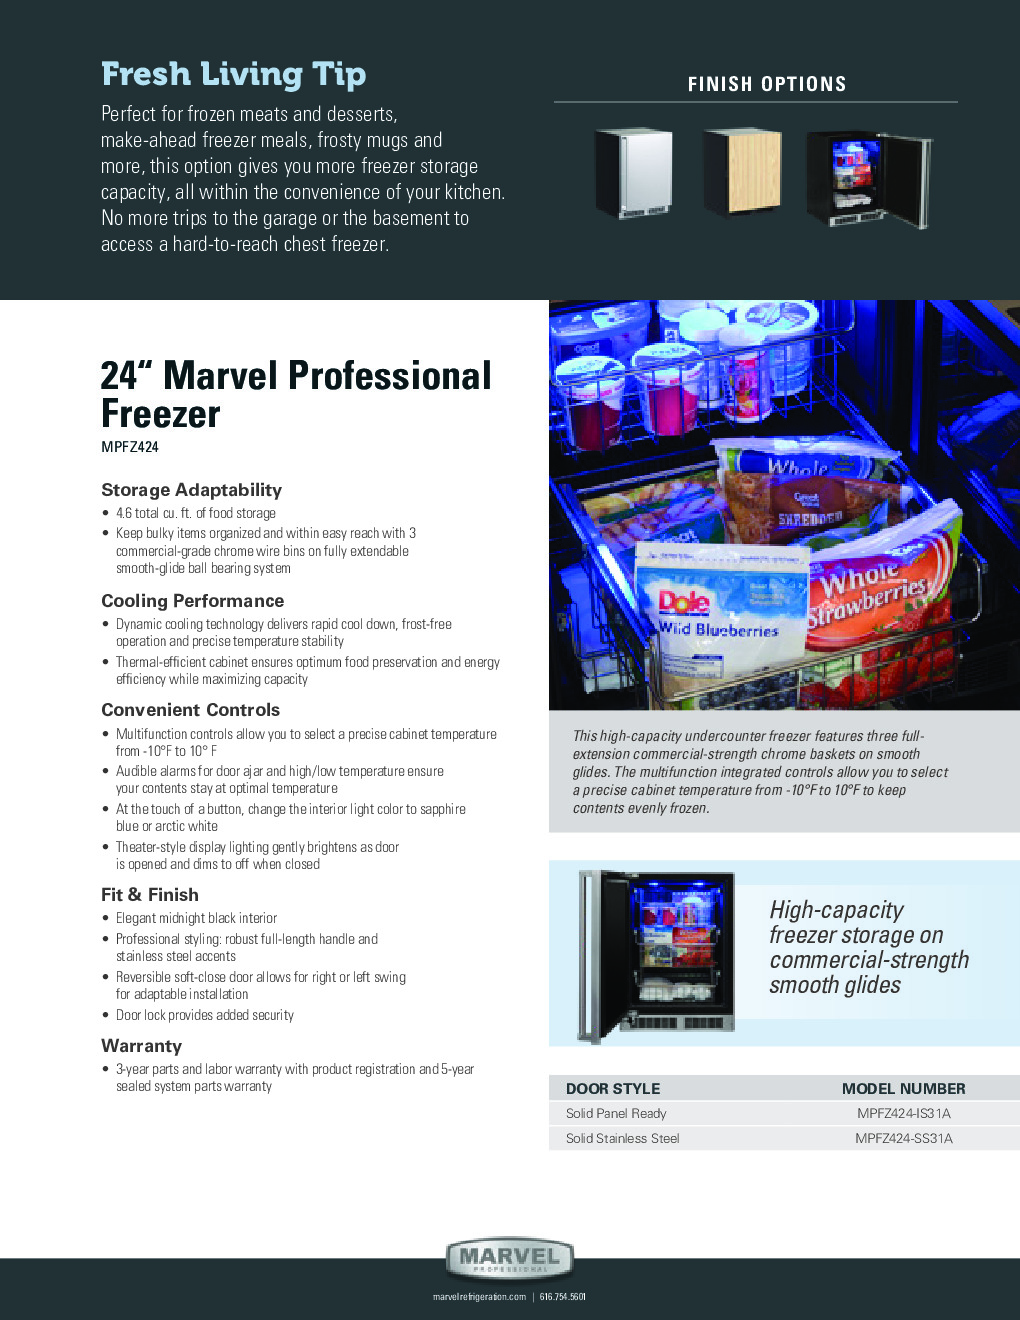 Marvel MPFZ424-IS31A 24